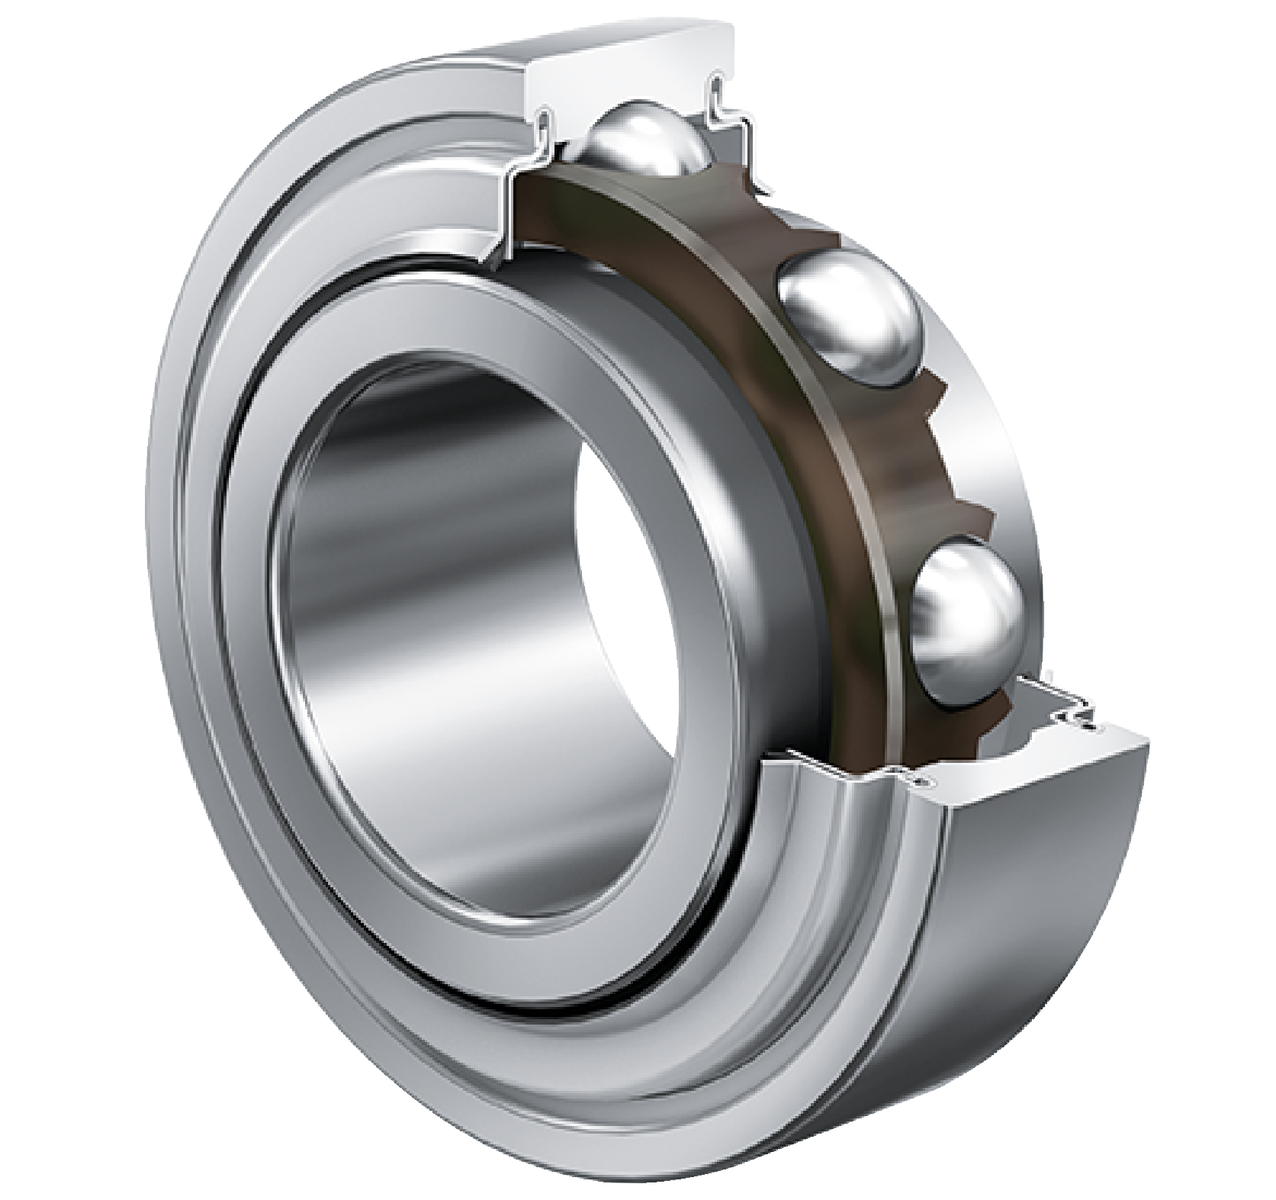 Radial Insert Ball Bearing 2..-KRR, Cylindrical Outer Ring, Inner Ring for Fit, R Seals on Both Sides 203-XL-KRR-AH02-C5